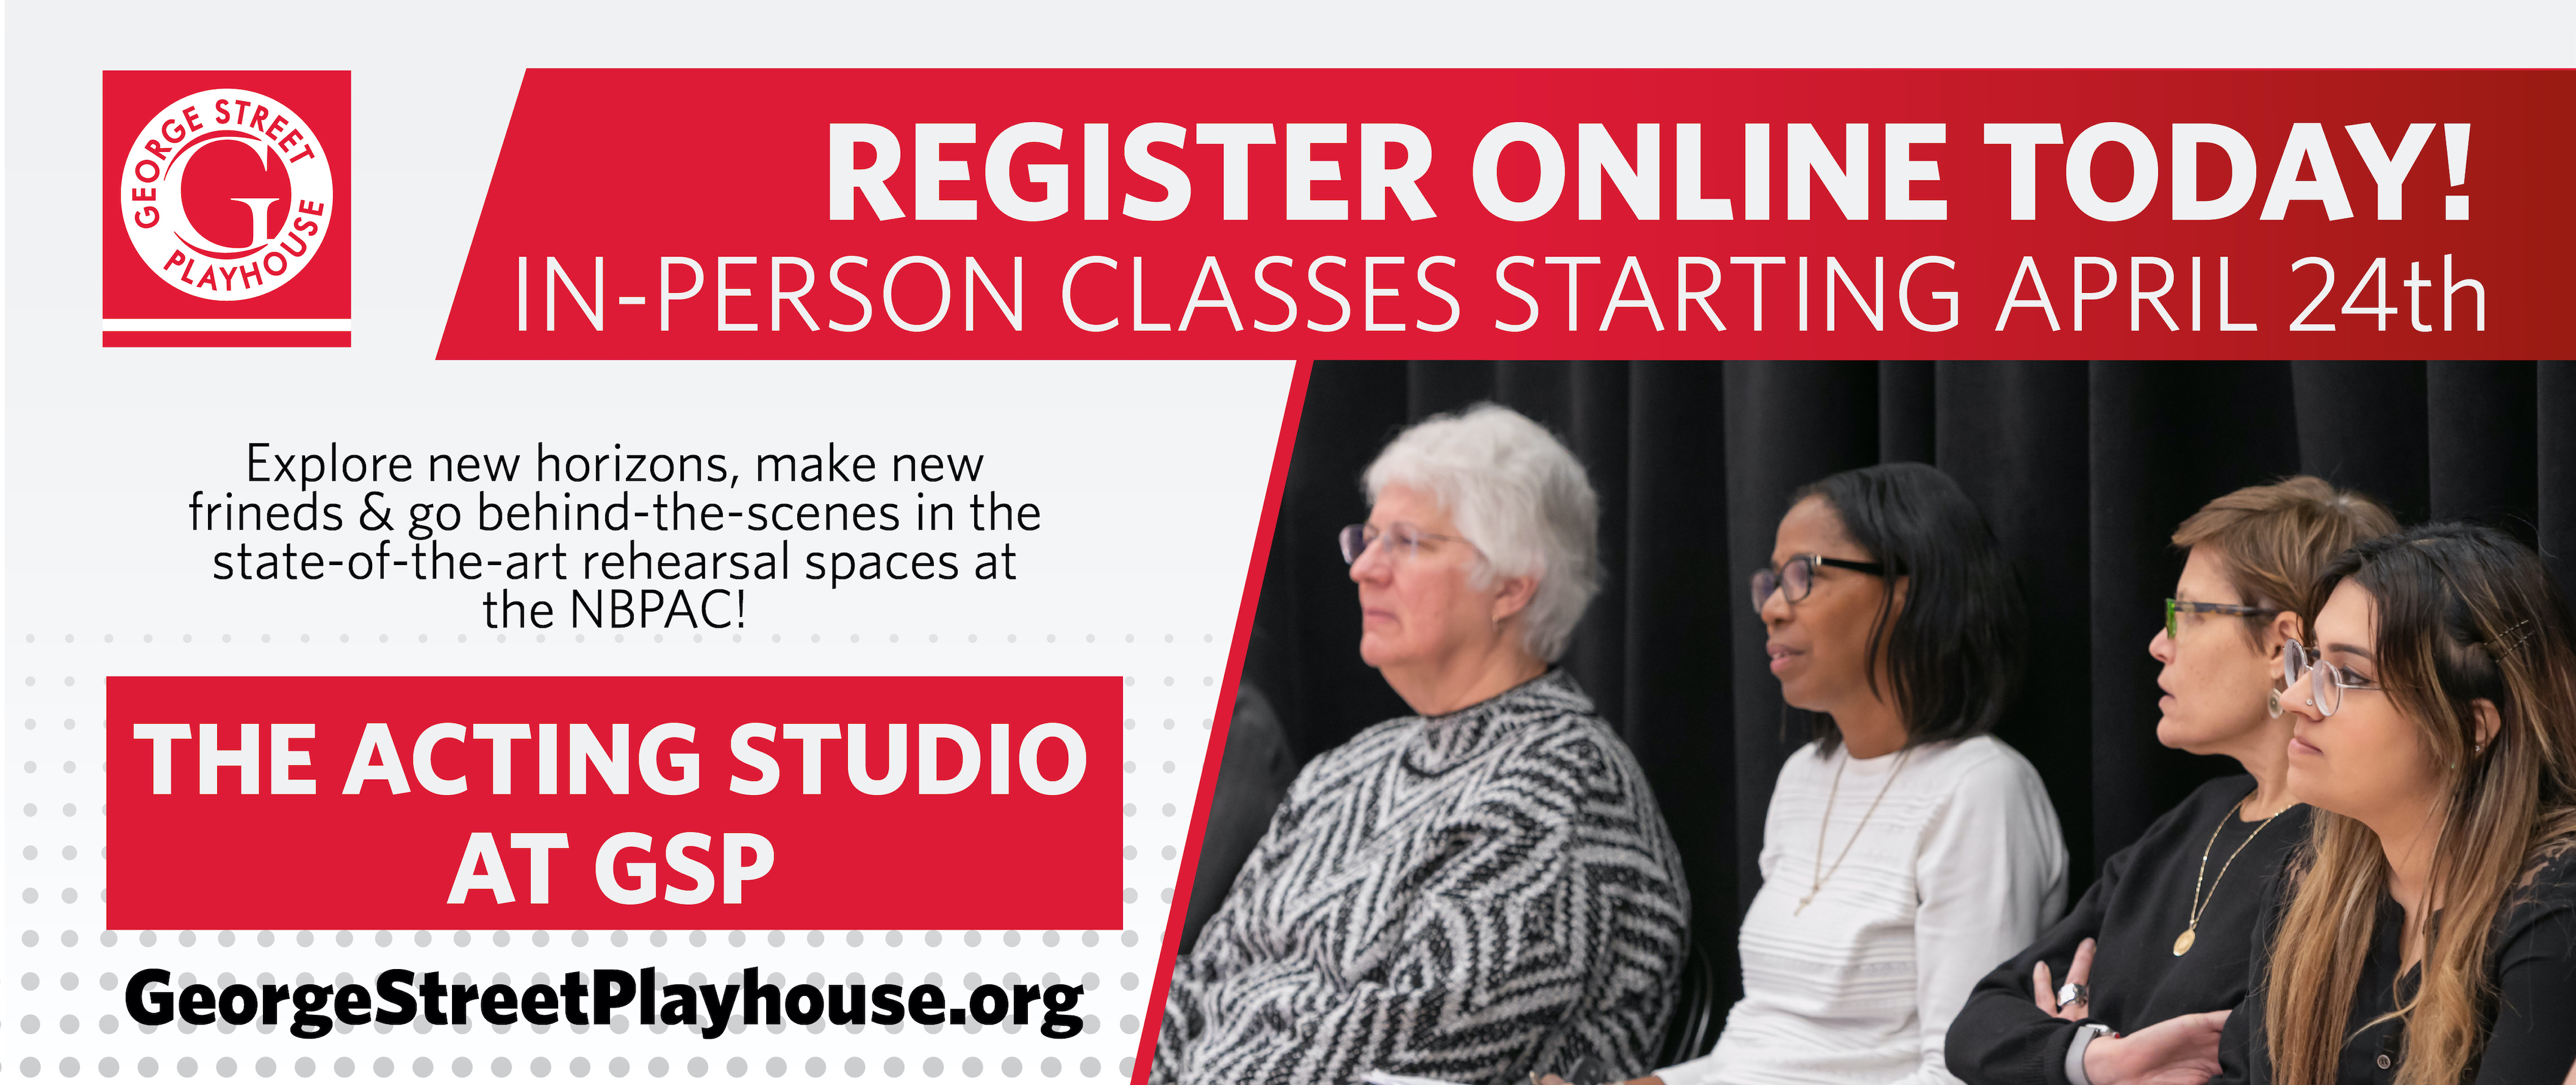 Register Online Today! In-person classes starting April 24th